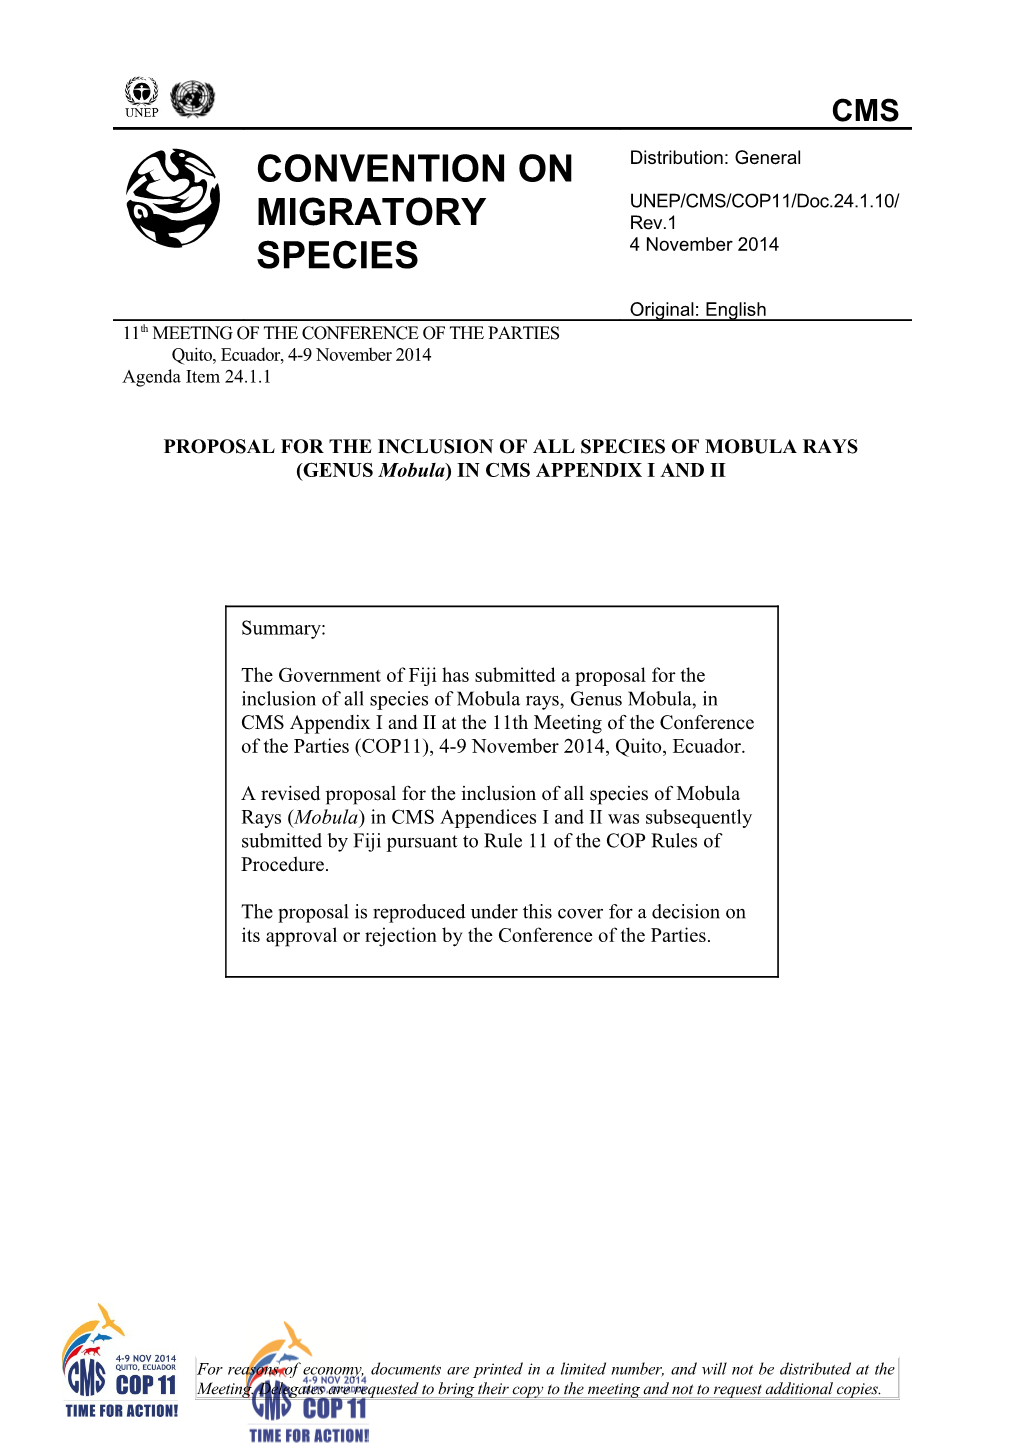 Proposal for Inclusion of the SPECIES of CHONDRICHTHYAN FISH on the Appendices of the Convention